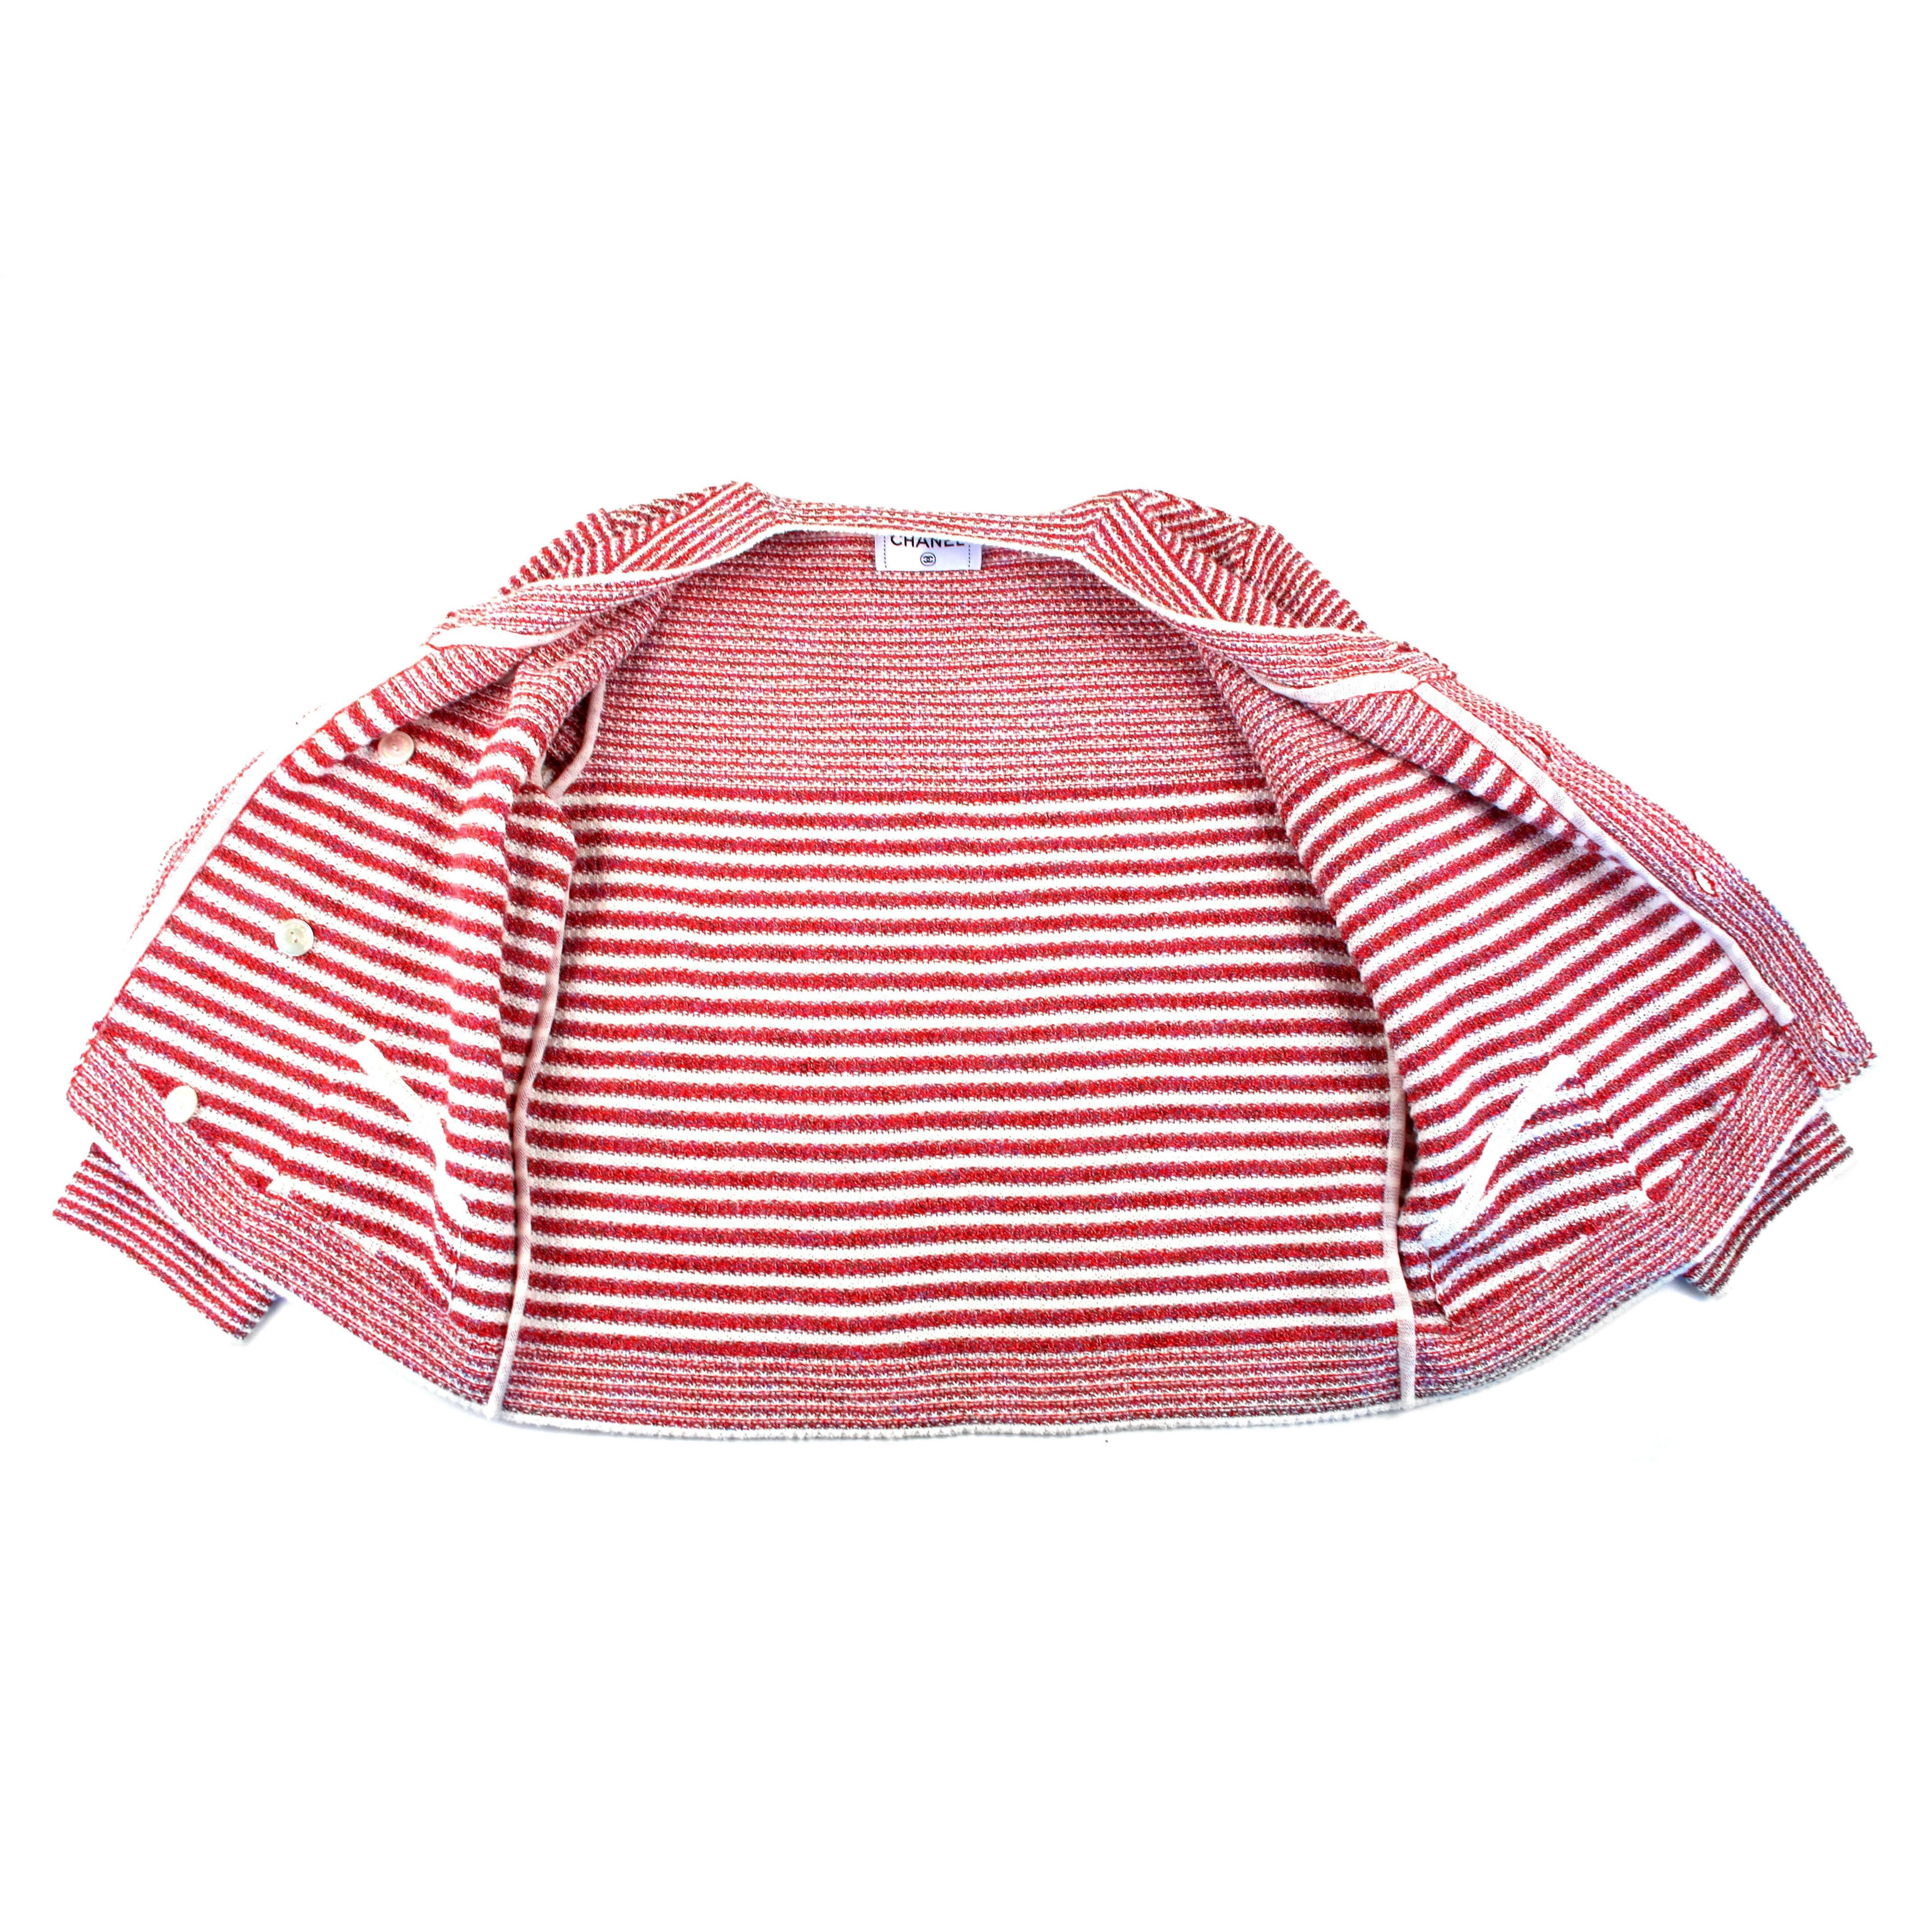 red and white striped cardigan